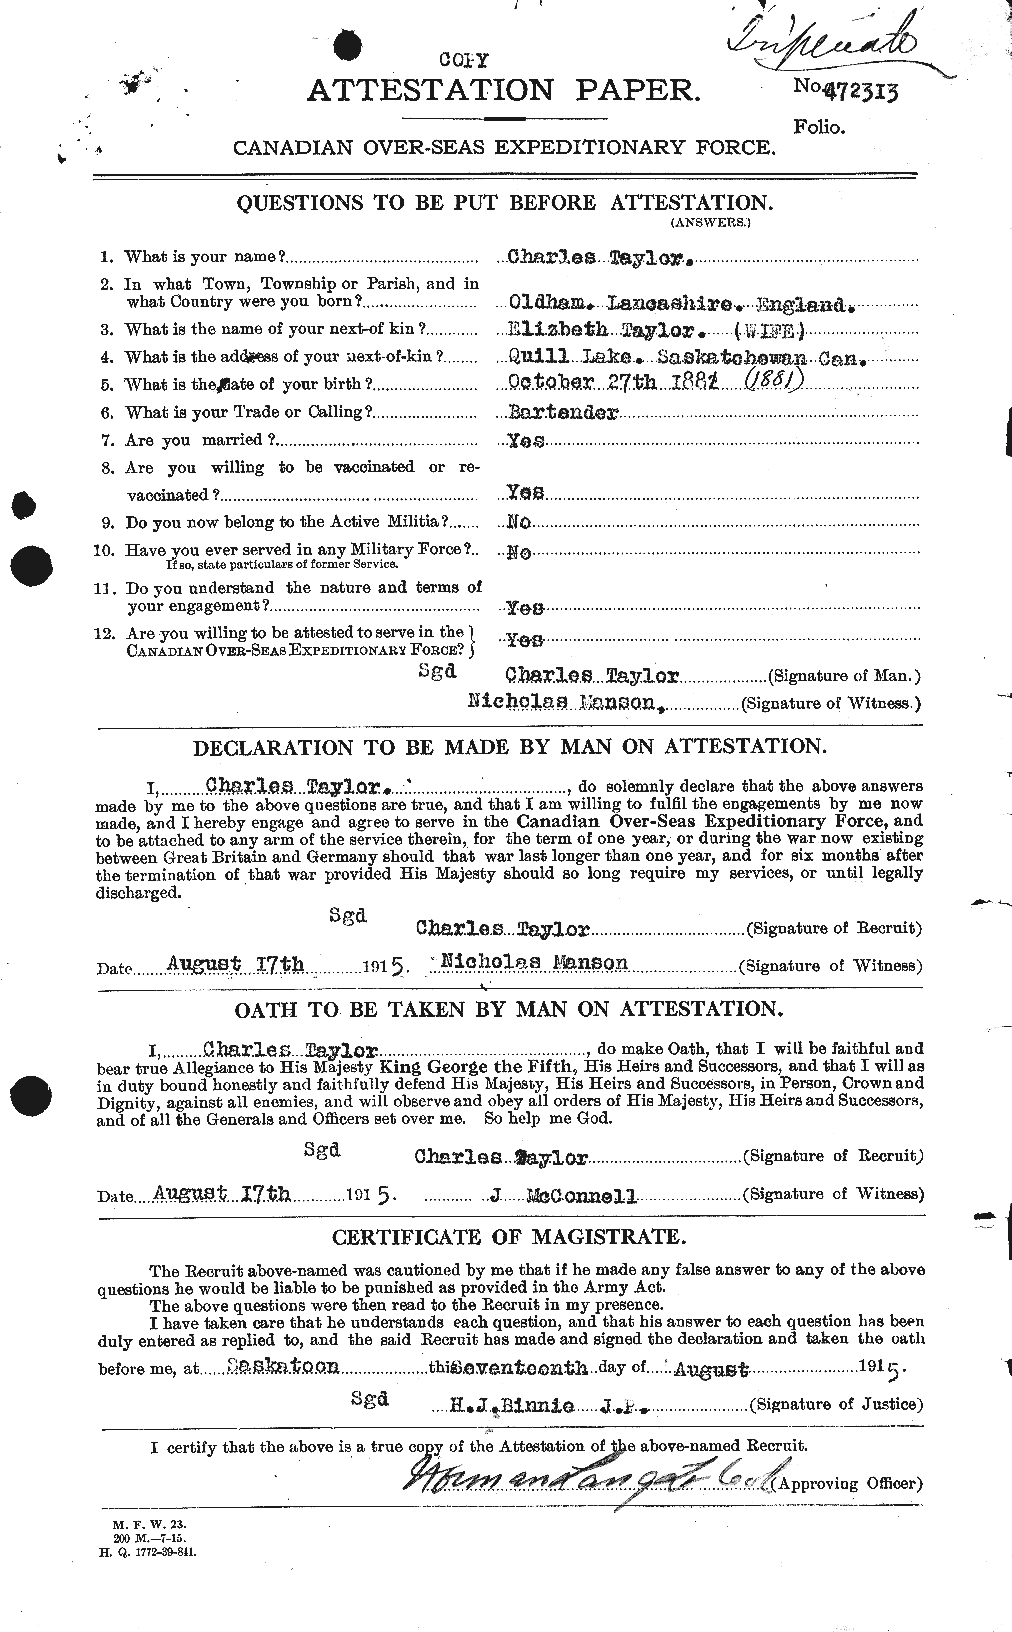 Personnel Records of the First World War - CEF 626808a